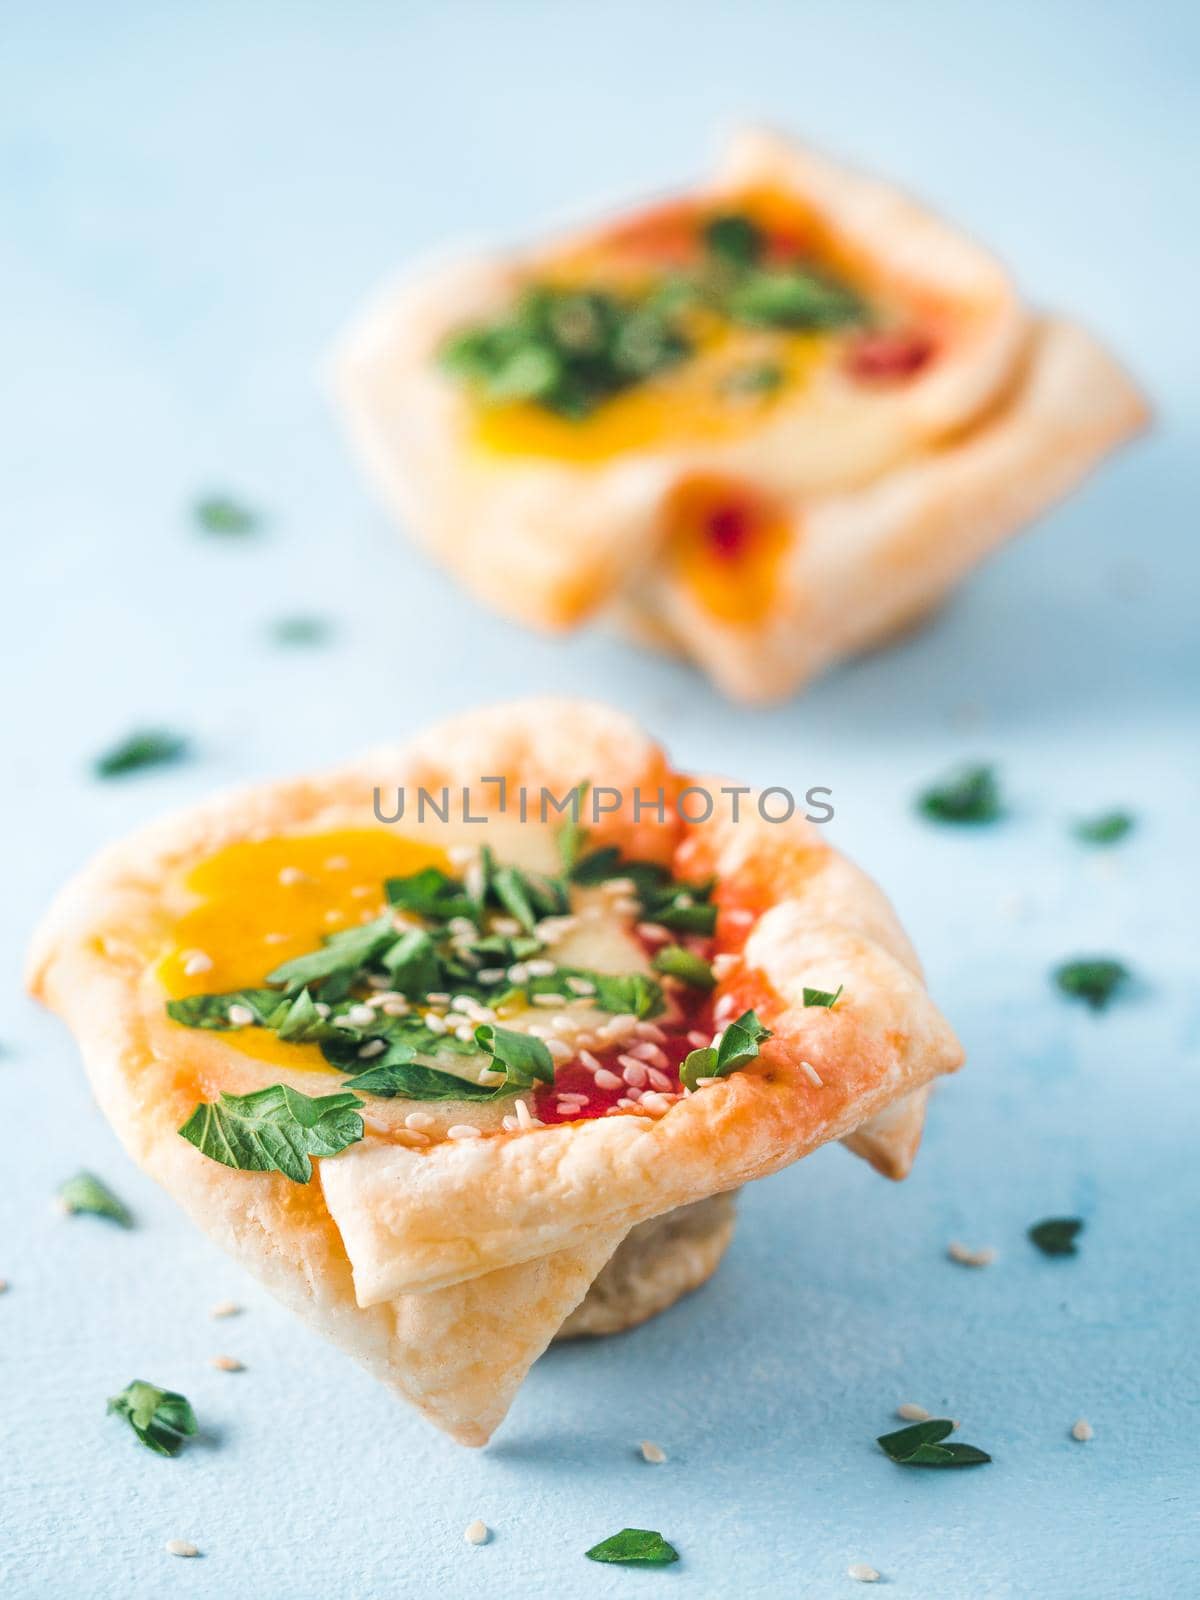 Ideas and recipes for healthy Vegan Shakshouka cups with vegan tofu eggs and turmeric yolk. Puff filo pastry,tomato and vegetable sauce and fresh green parsley. Copy space for text. Vertical.